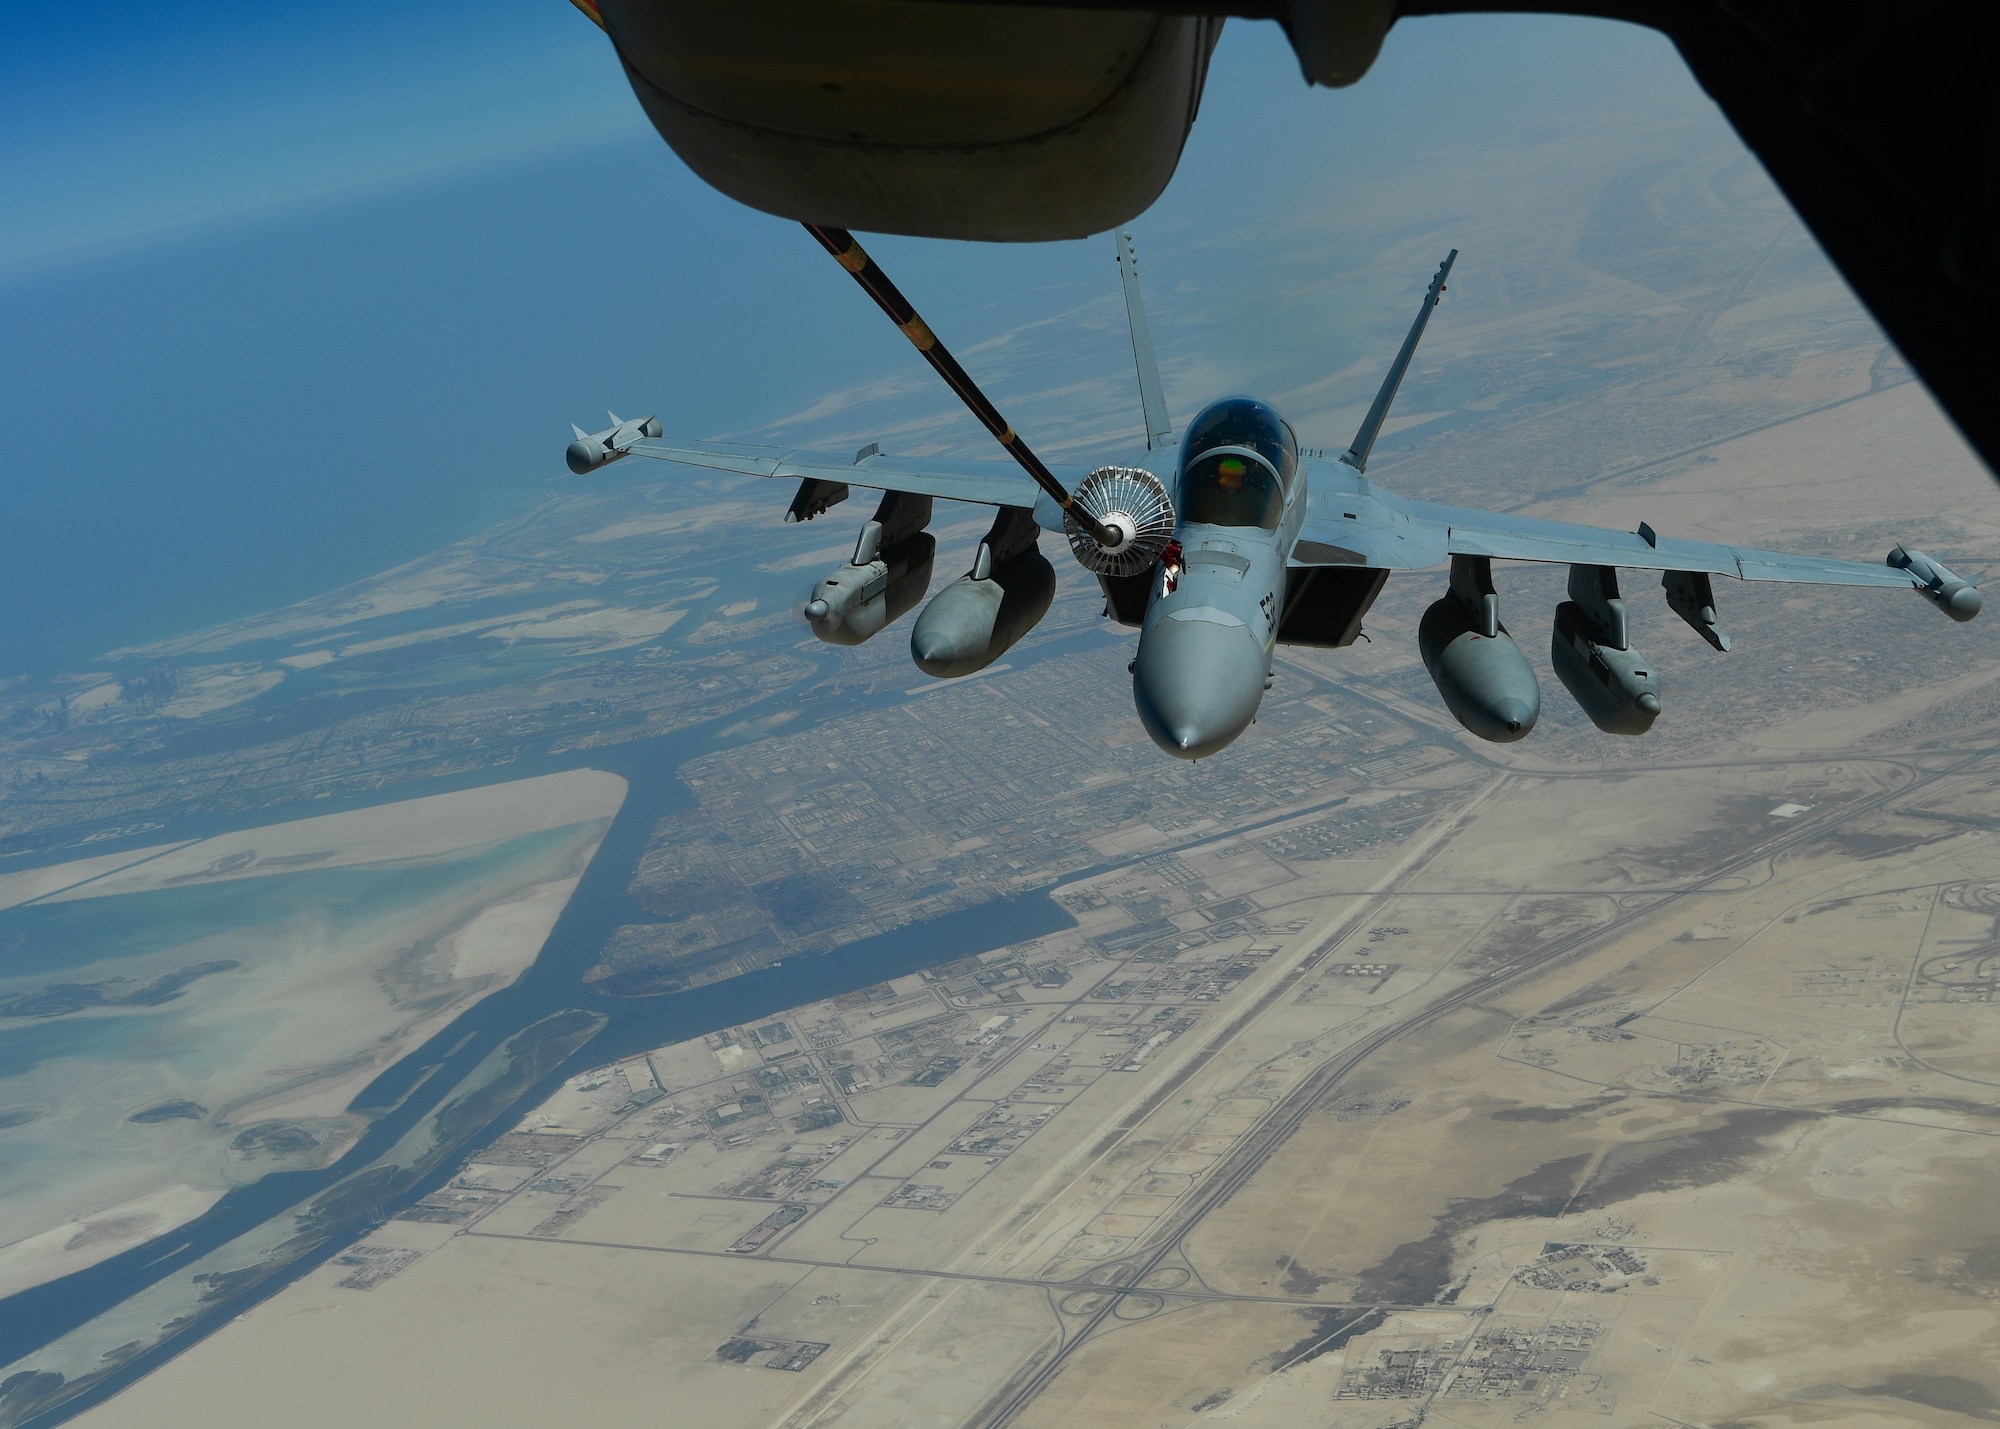 A U.S. Navy EA-18G Growler receives fuel from a KC-10 Extender assigned to the 908th Expeditionary Air Refueling Squadron out of Al Dhafra Air Base, United Arab Emirates, Aug. 28, 2019. The 908th EARS, part of U.S. Air Forces Central Command, is responsible for delivering fuel to U.S. and coalition forces, enabling a constant presence in the area of responsibility. (U.S. Air Force photo by Staff Sgt. Chris Drzazgowski)